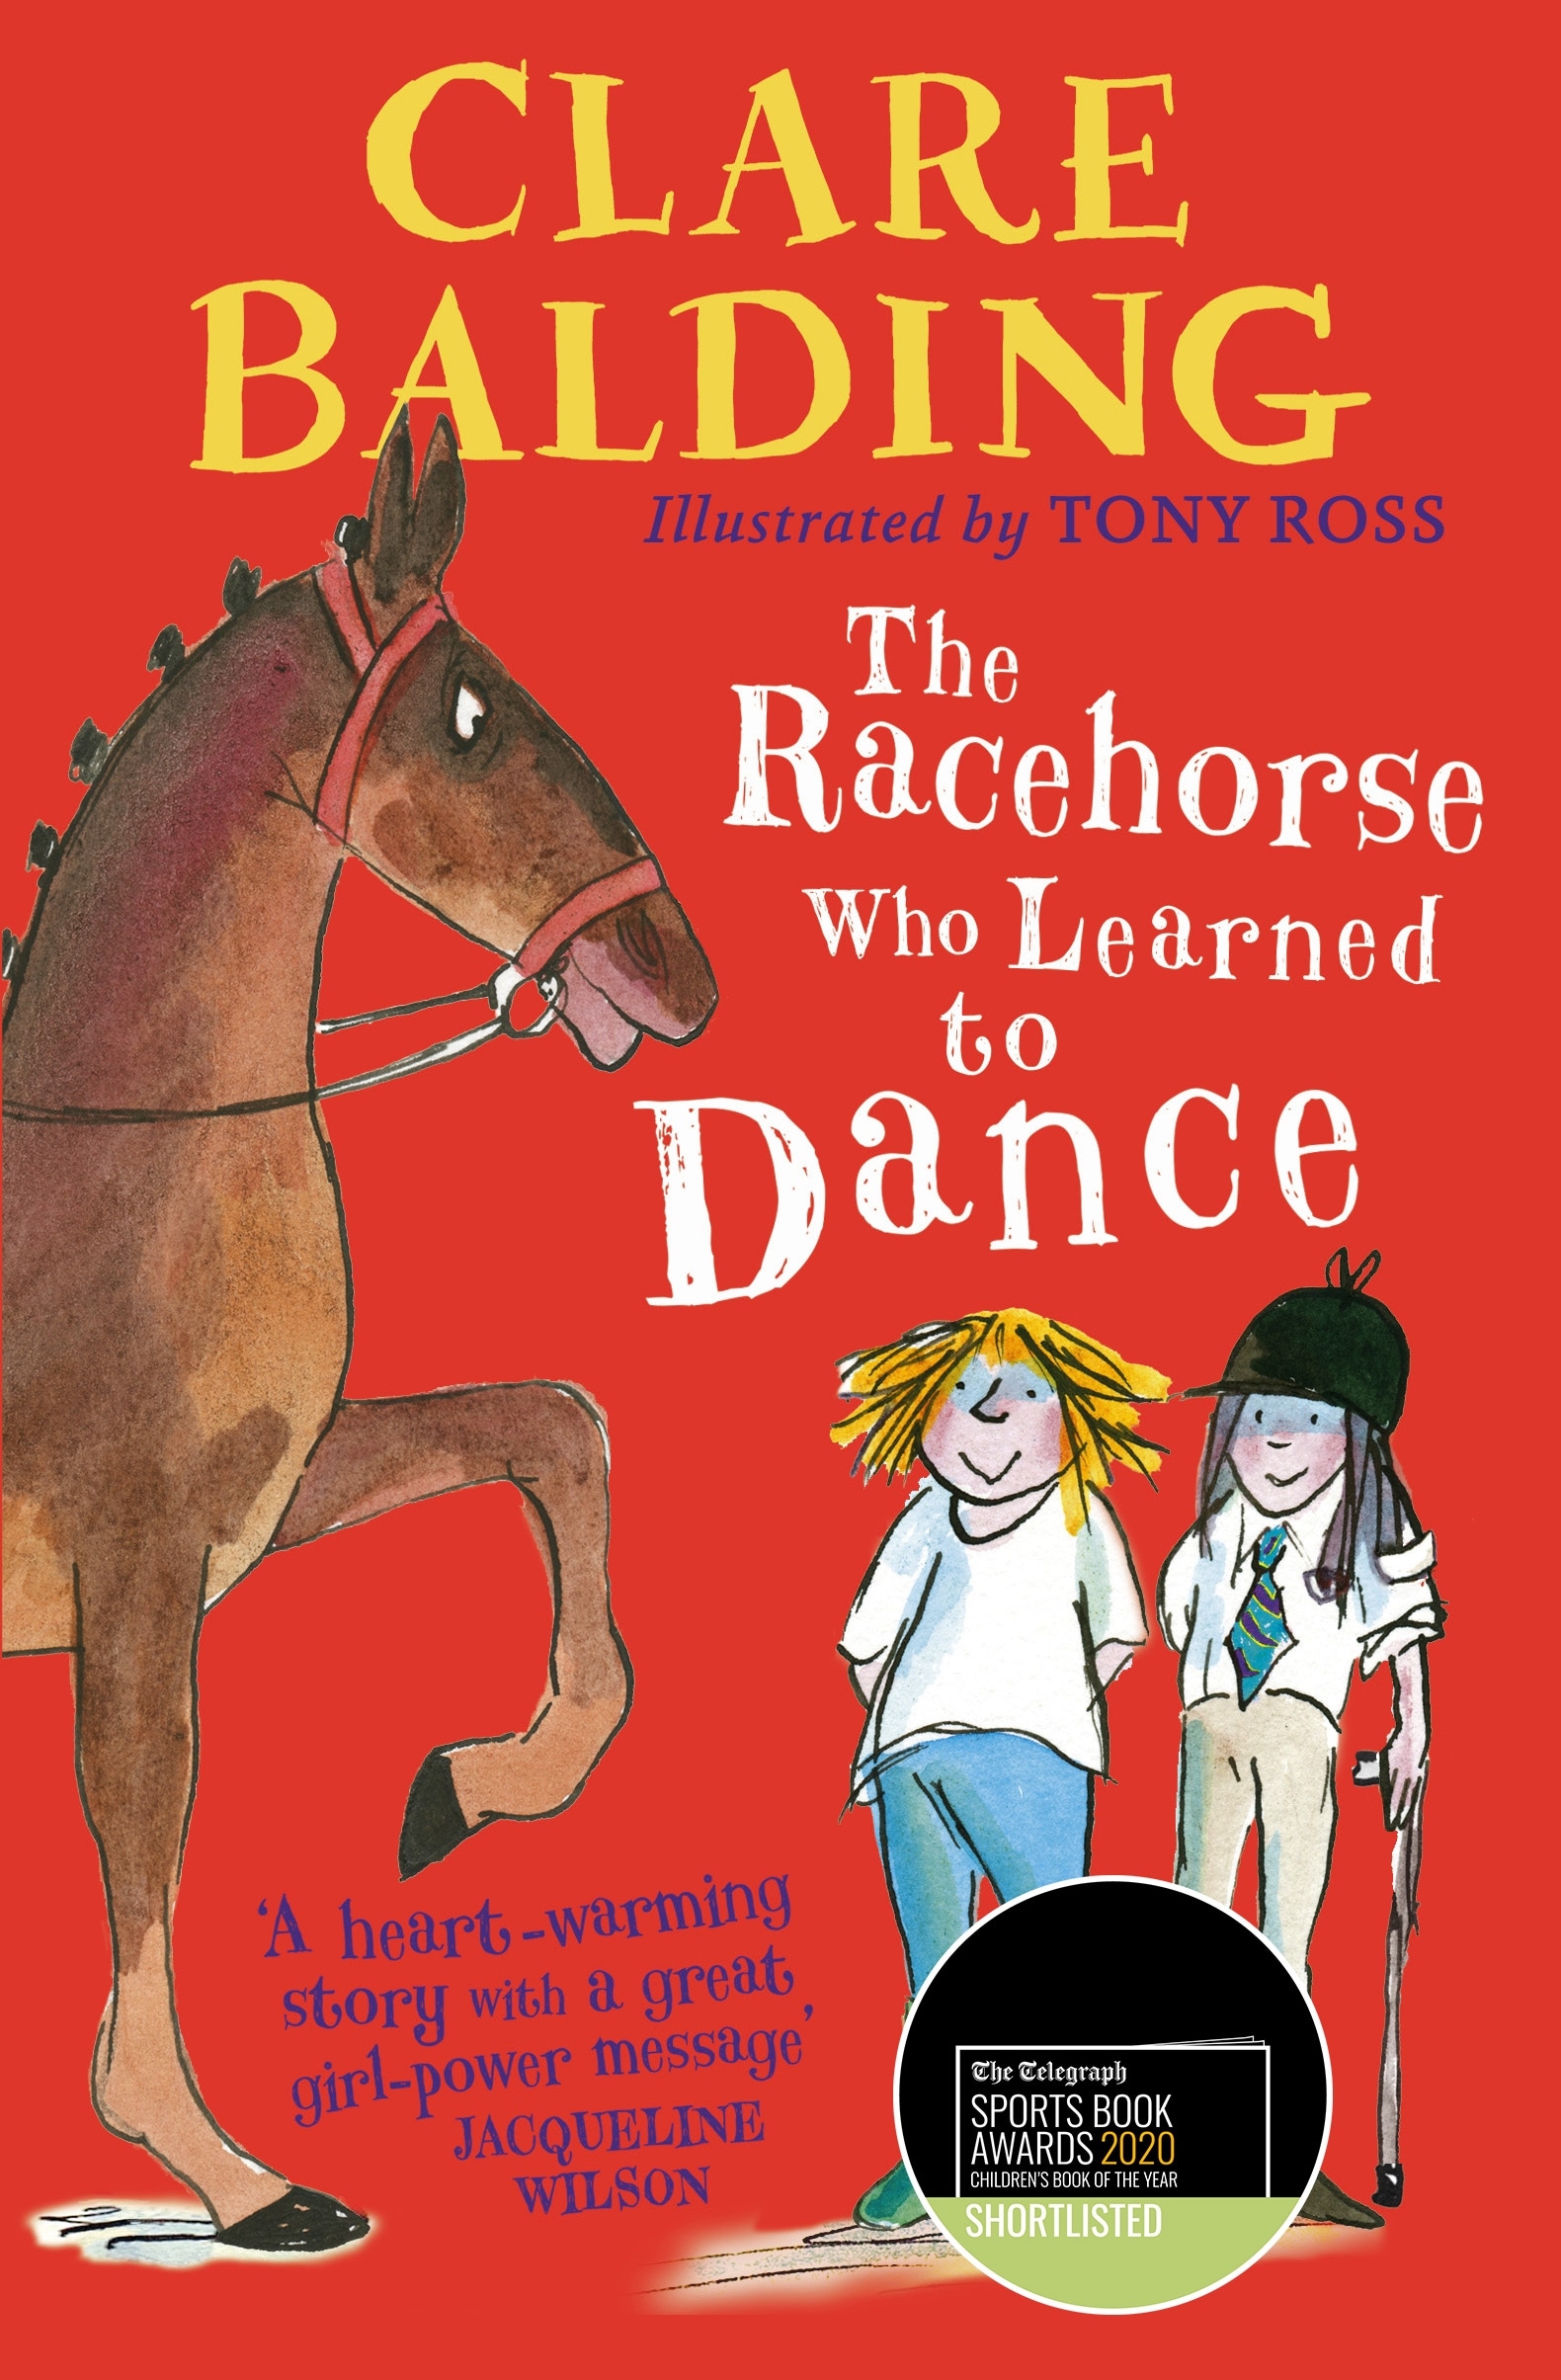 Book “The Racehorse Who Learned to Dance” by Clare Balding, Tony Ross — June 13, 2019